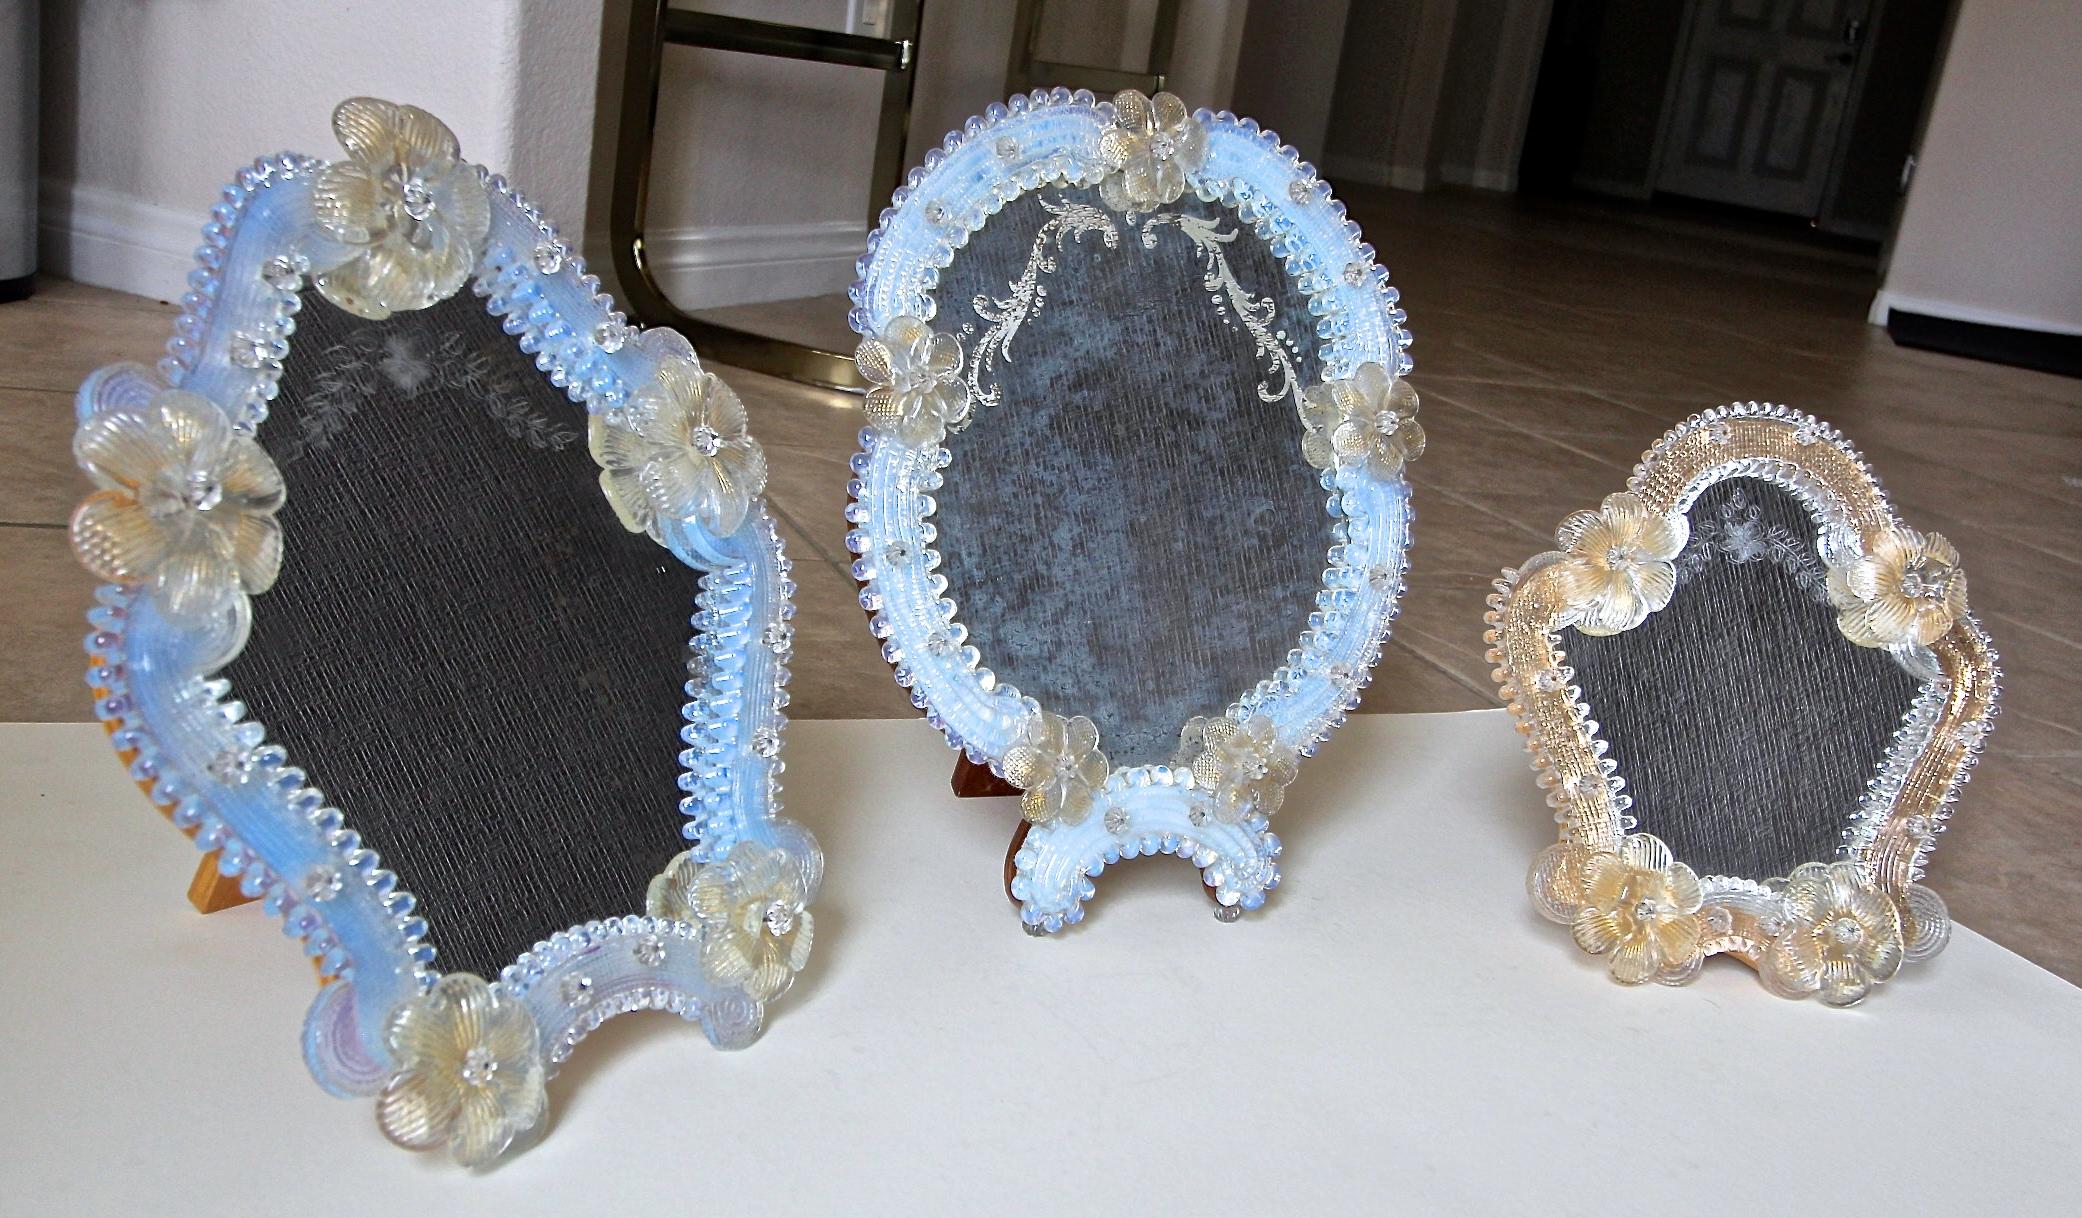 Grouping of three Italian Murano table mirrors with wood backing, some frames have opalescent glass and others clear glass with gold foil backing. All have clear and gold inclusion flowers. 
Sizes:
1) 10